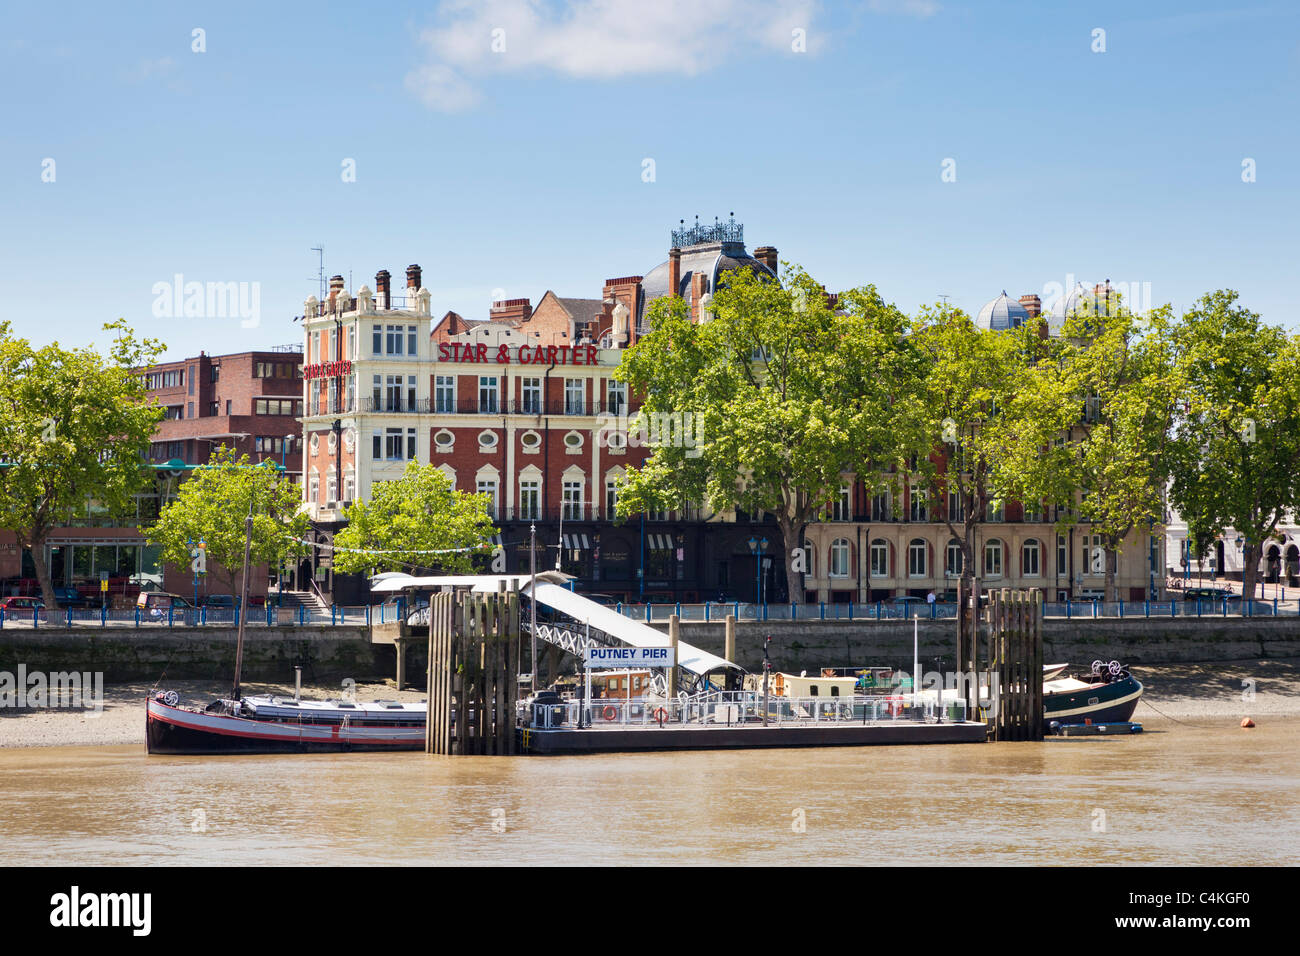 View of Putney Pier on the River Thames, London, England, UK Stock Photo